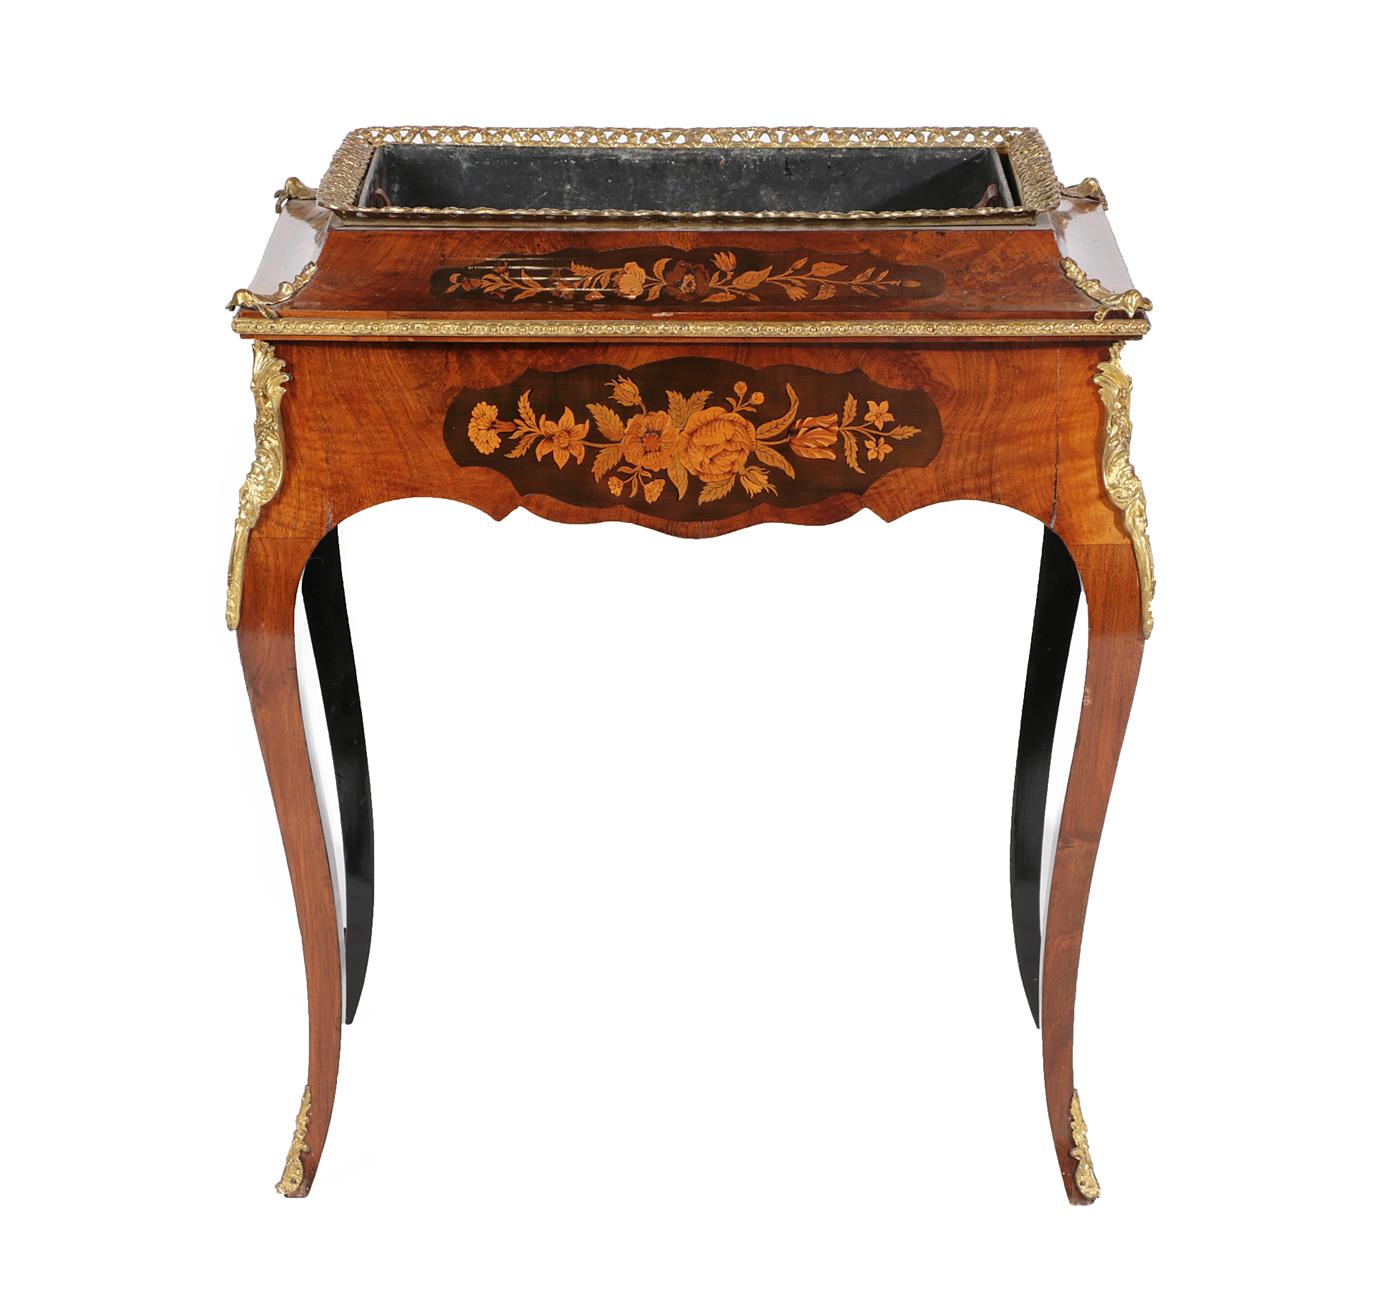 Lot 646 - A Victorian Figured Walnut, Marquetry and Gilt Metal Mounted Jardiniere Table, circa 1880, in Louis